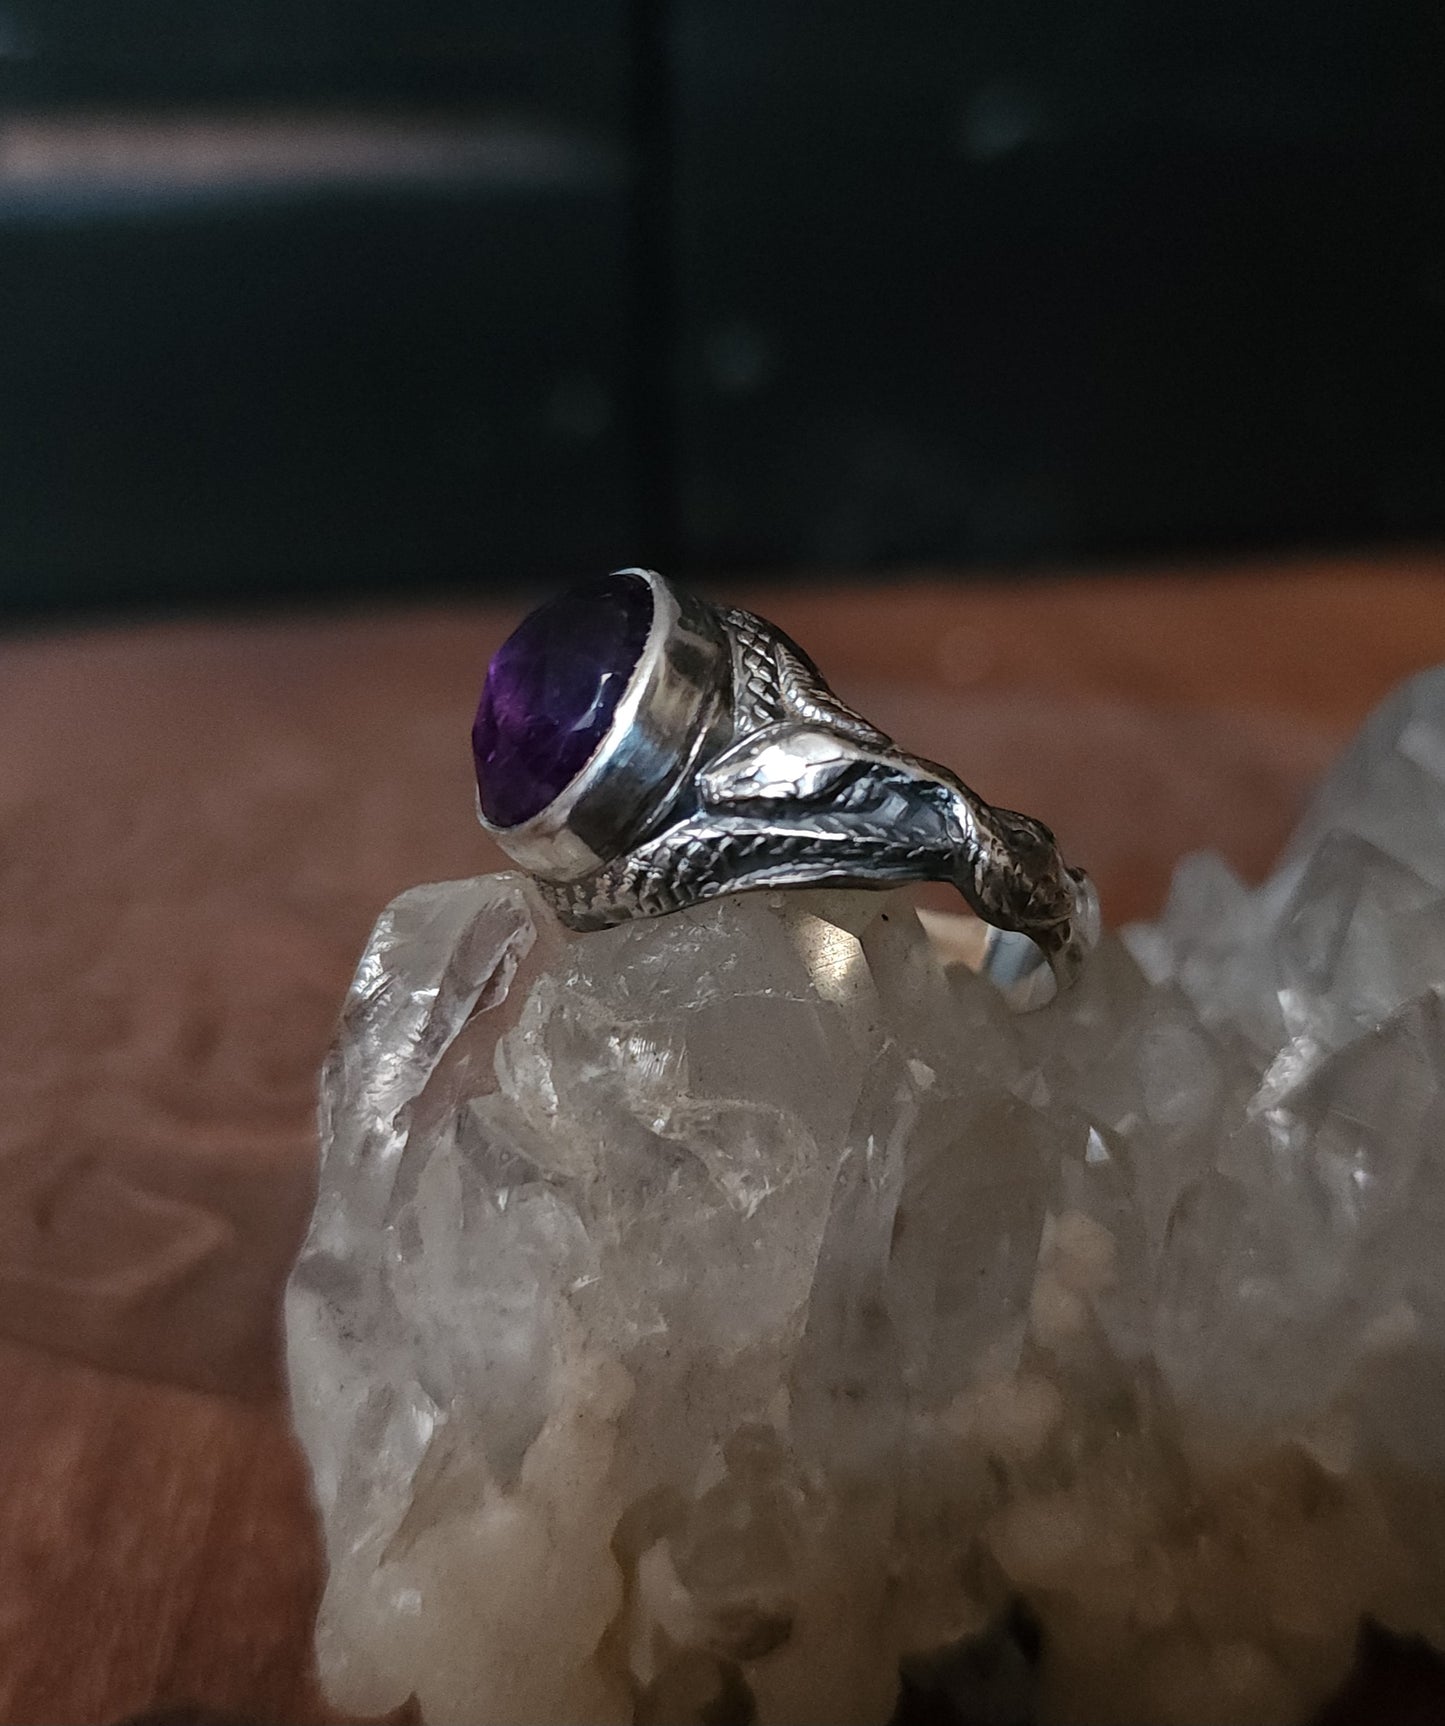 "Serpentine" - Handcrafted Amethyst Sterling Silver Ring